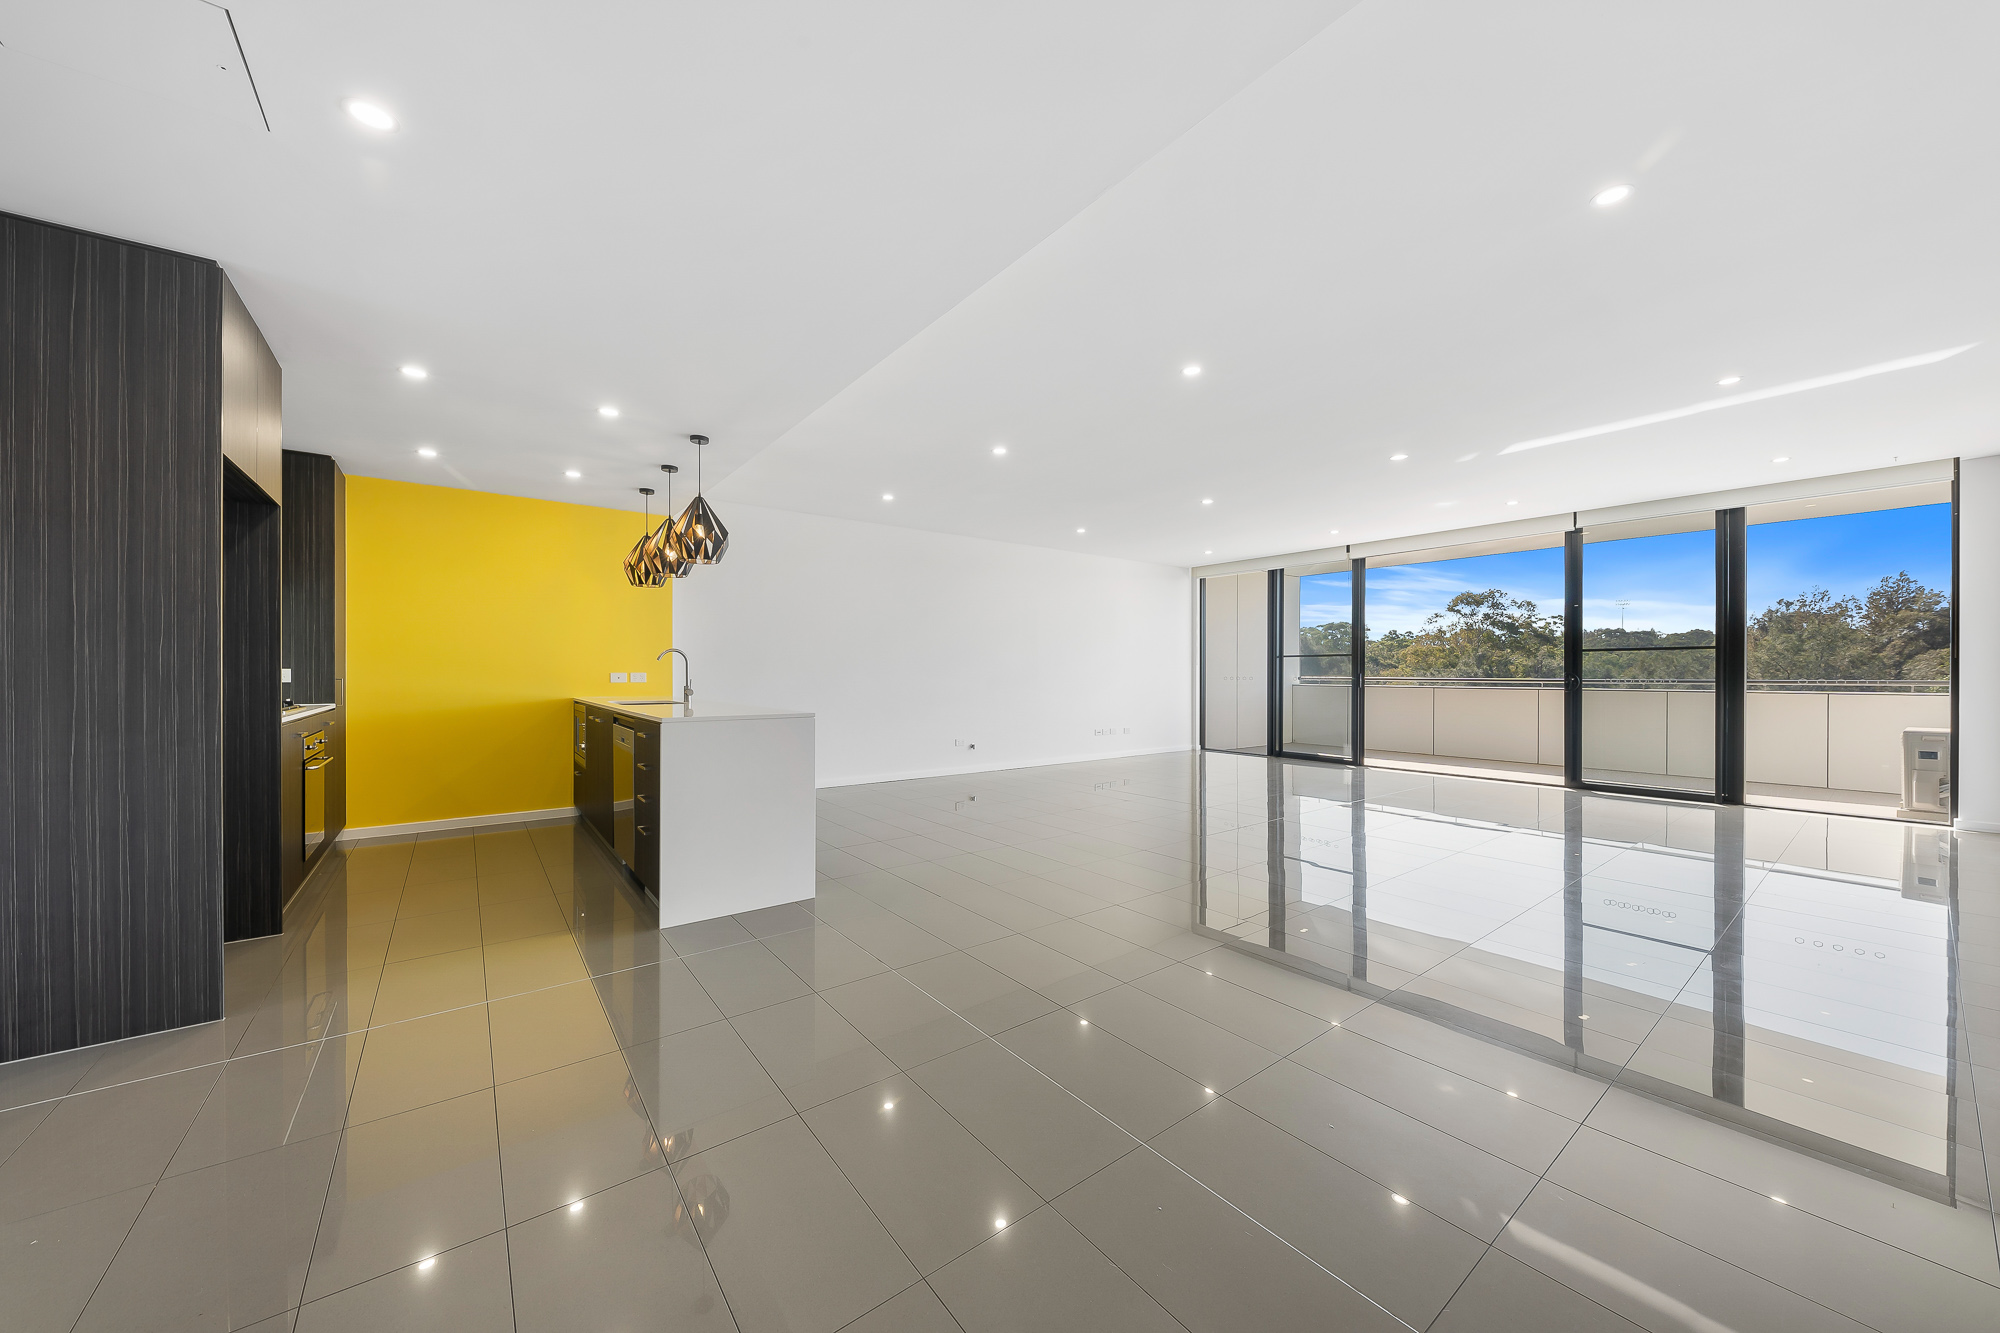 3 Bedrooms, Apartment, For Sale, Shoreline, Caddies Boulevard, 2 Bathrooms, Listing ID 1671, Rouse Hill, NSW, Australia, 2155,